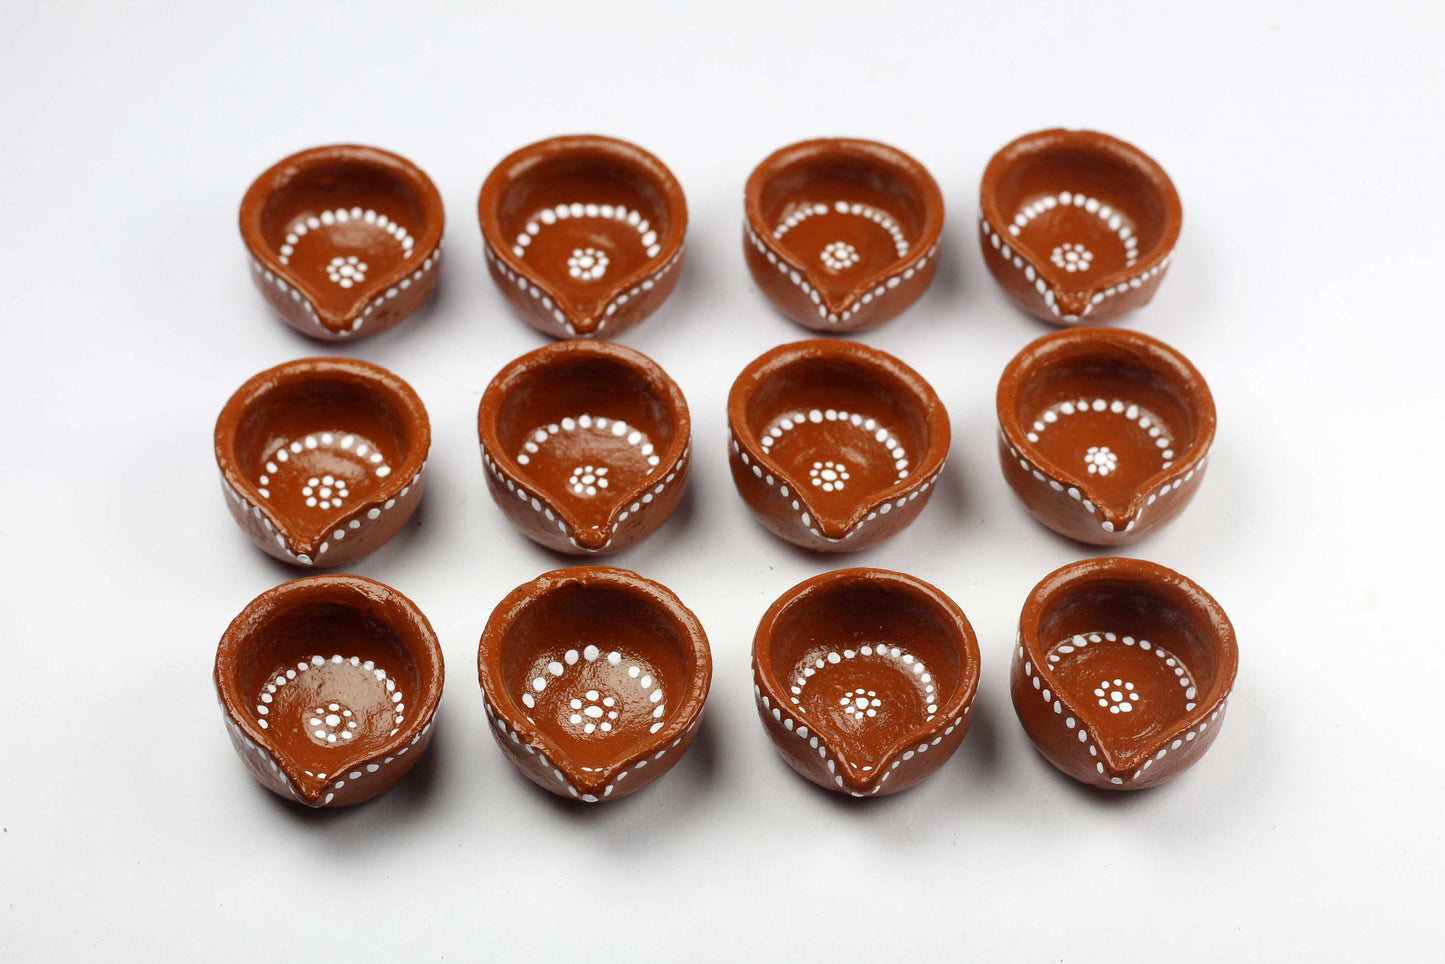 Neev hand painted earthenware diyas for decor,diwali and lighting(Pack of 12)